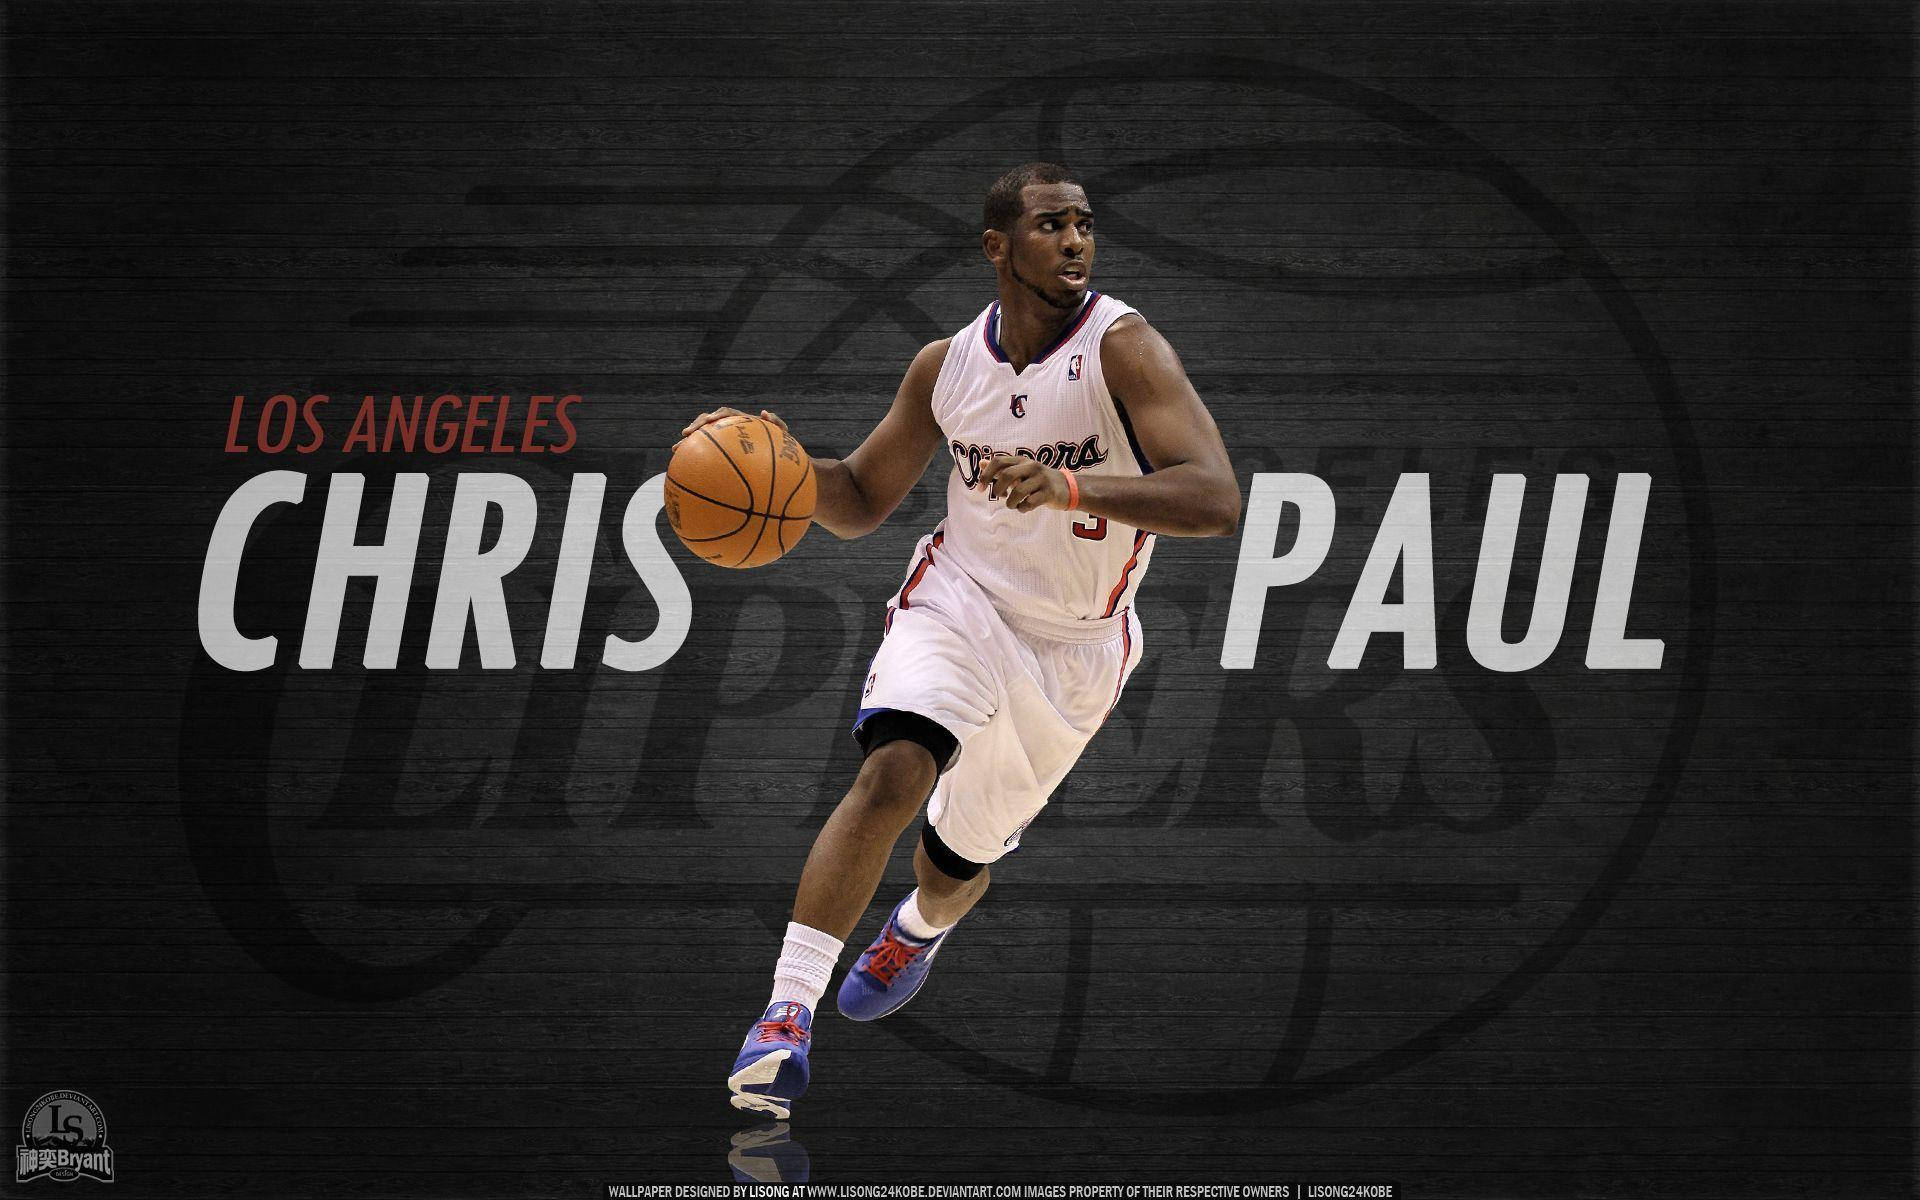 Chris Paul On The Court Demonstrating His Basketball Skills Background